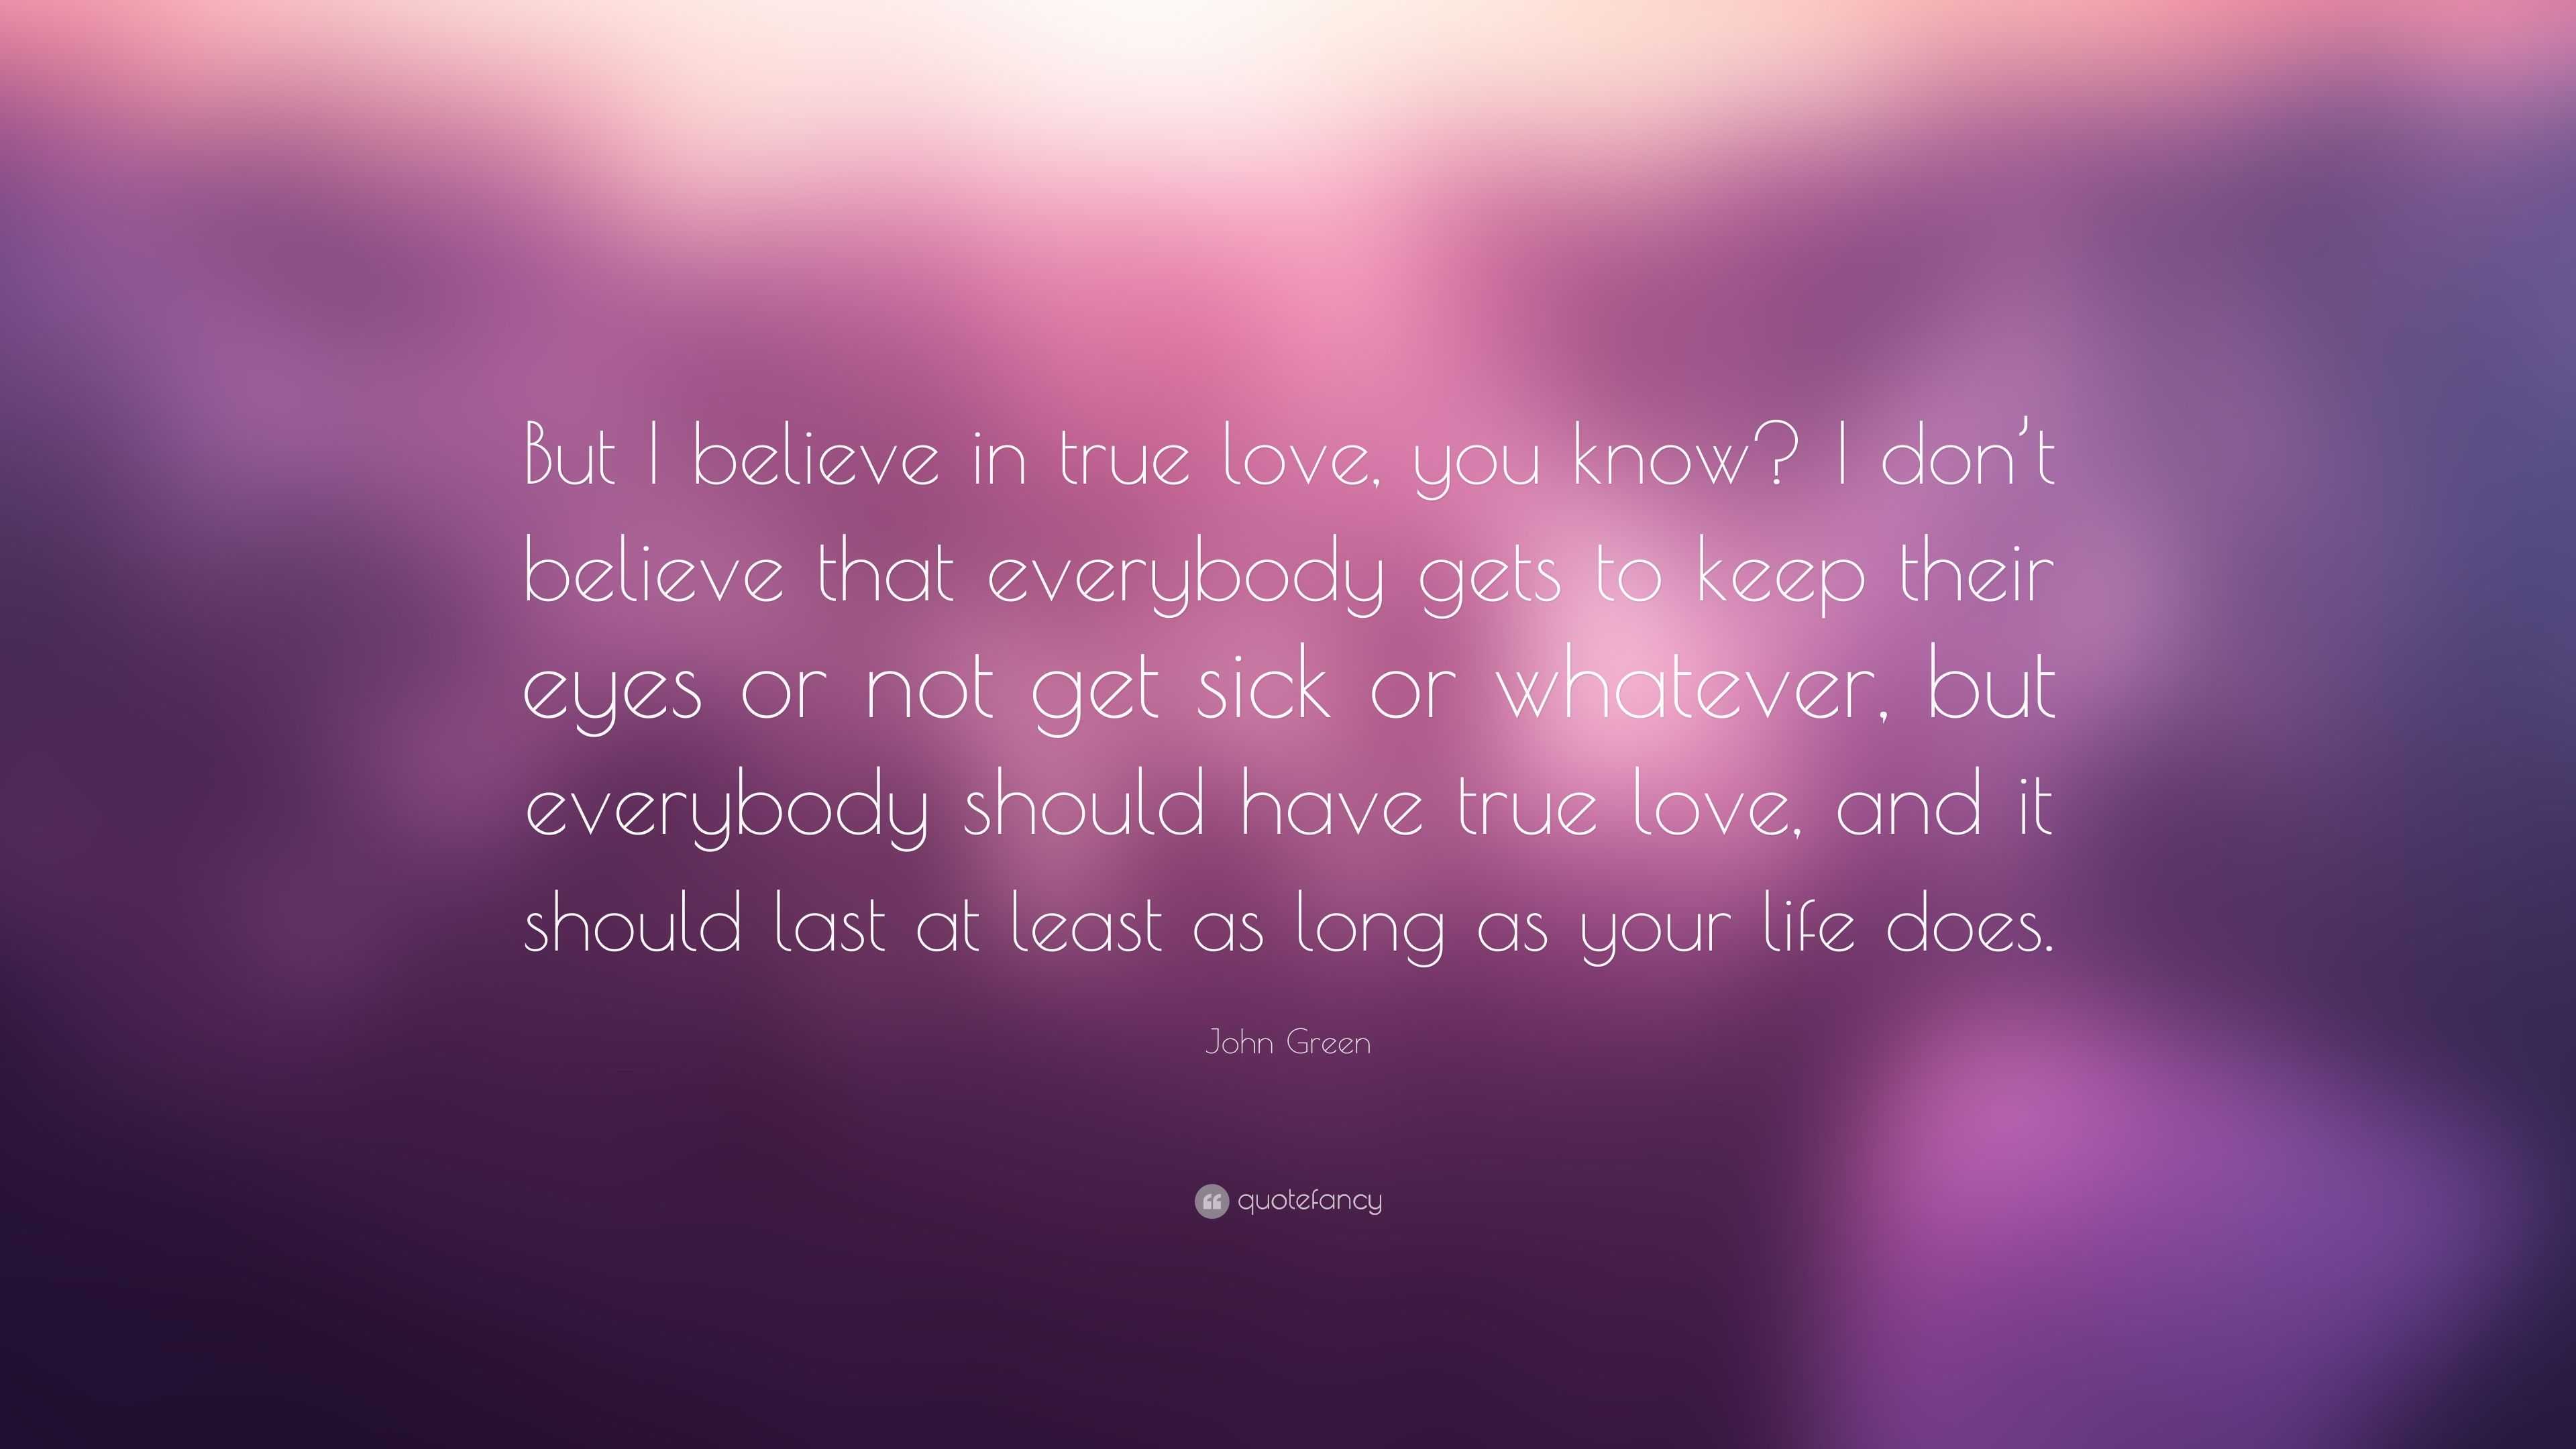 John Green Quote: “But I believe in true love, you know? I don’t ...